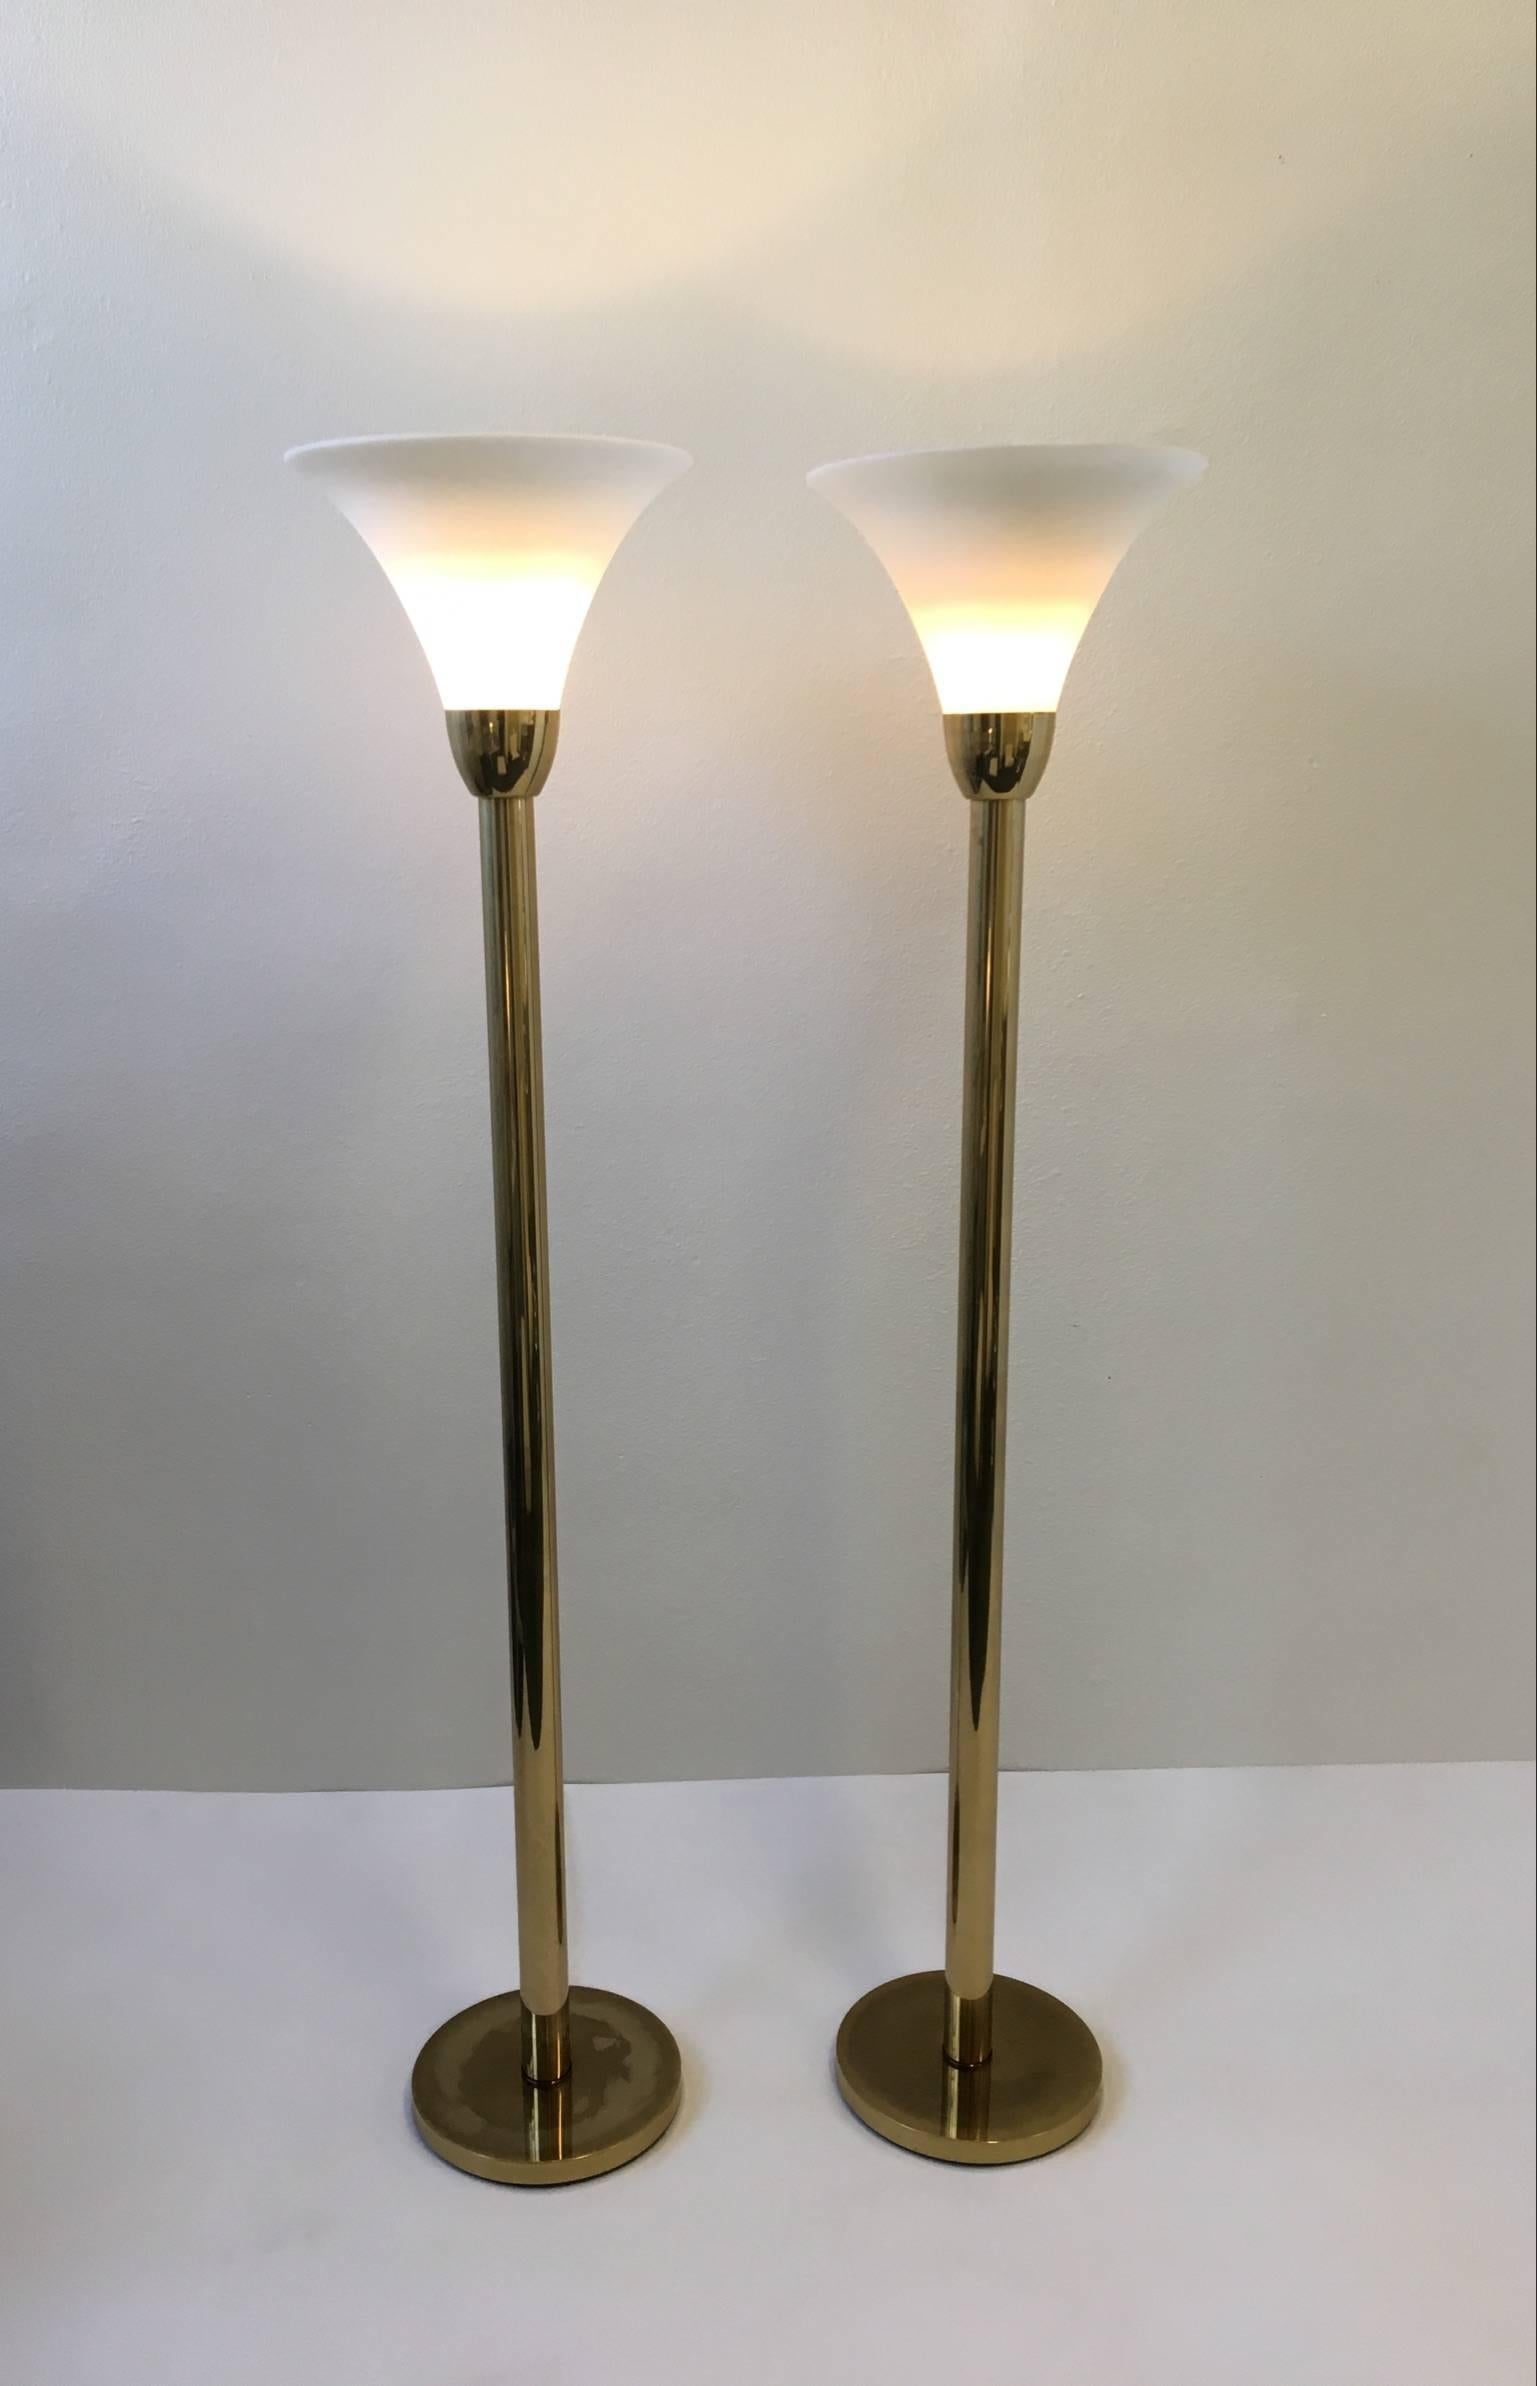 A glamorous pair aged brass and frosted glass shades torchiere floor lamps by Nessen Studios. The brass has a nice patina age to it. Please see detail photos.
The lamps have been newly rewired and have touch diameters.